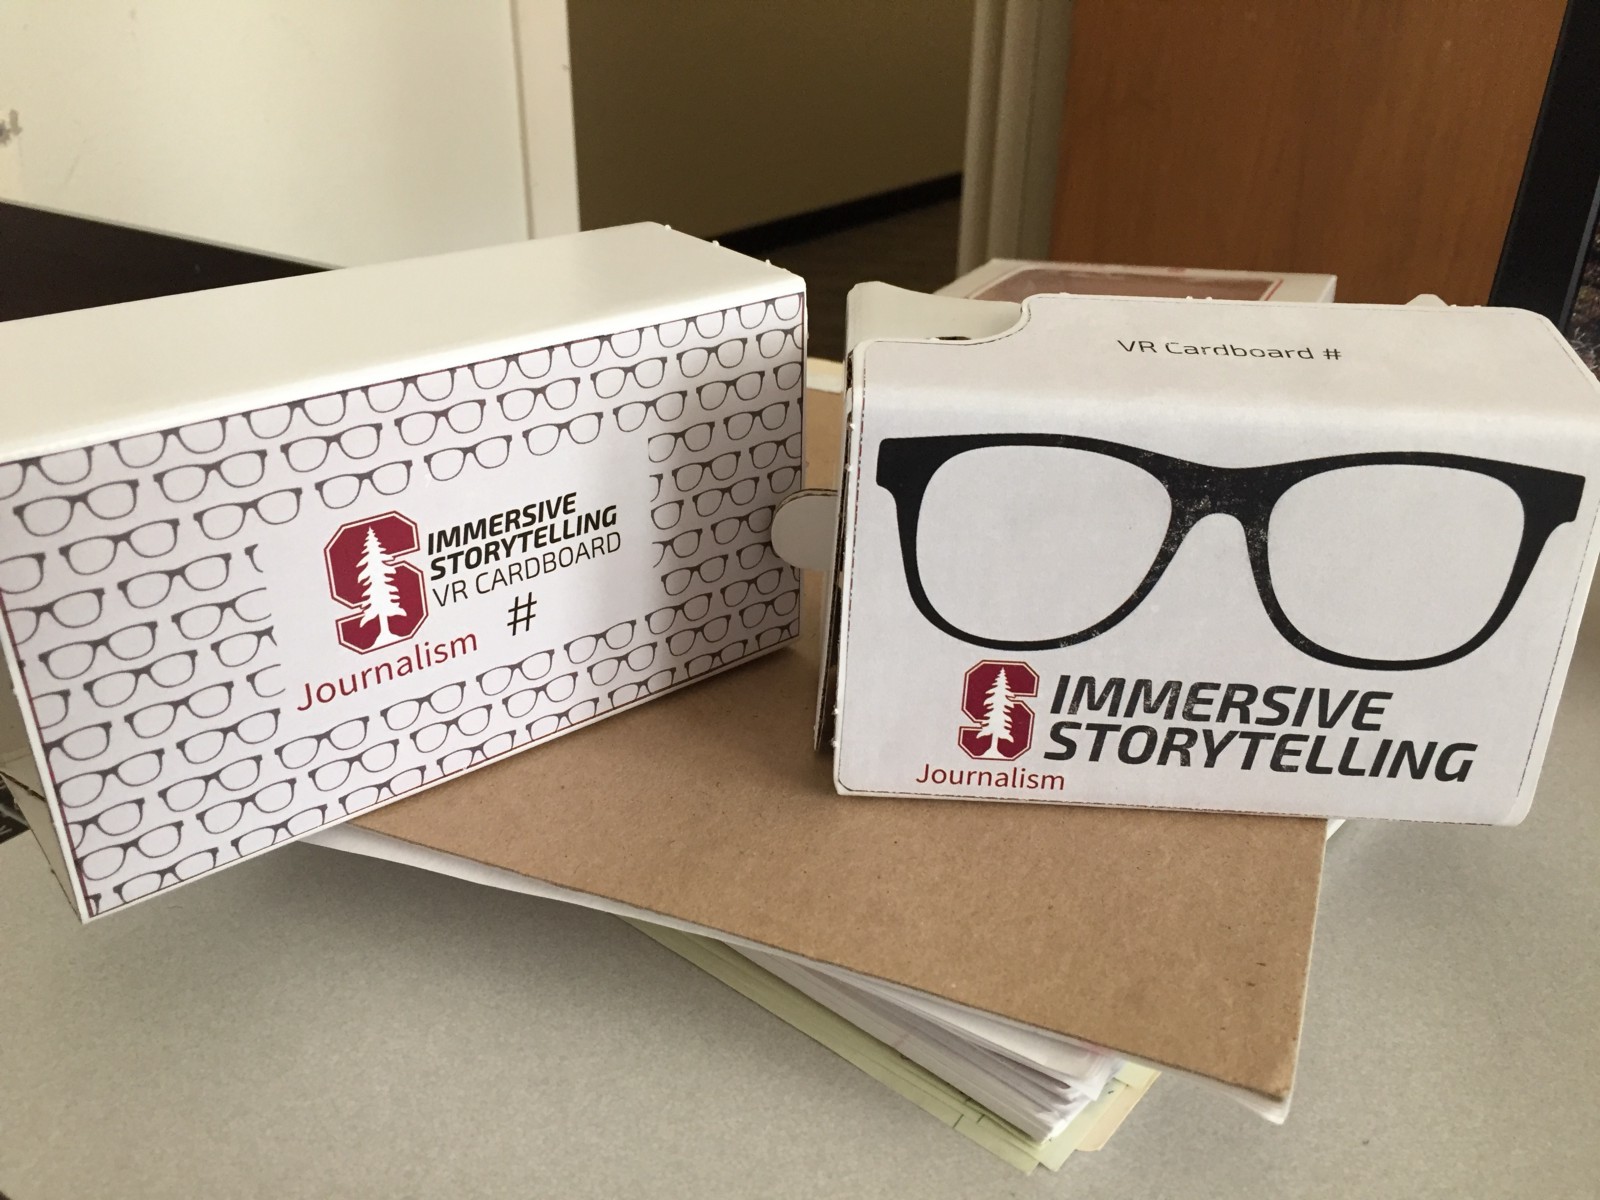 Cardboard viewers allowed students to use their smartphones to view VR journalism pieces.